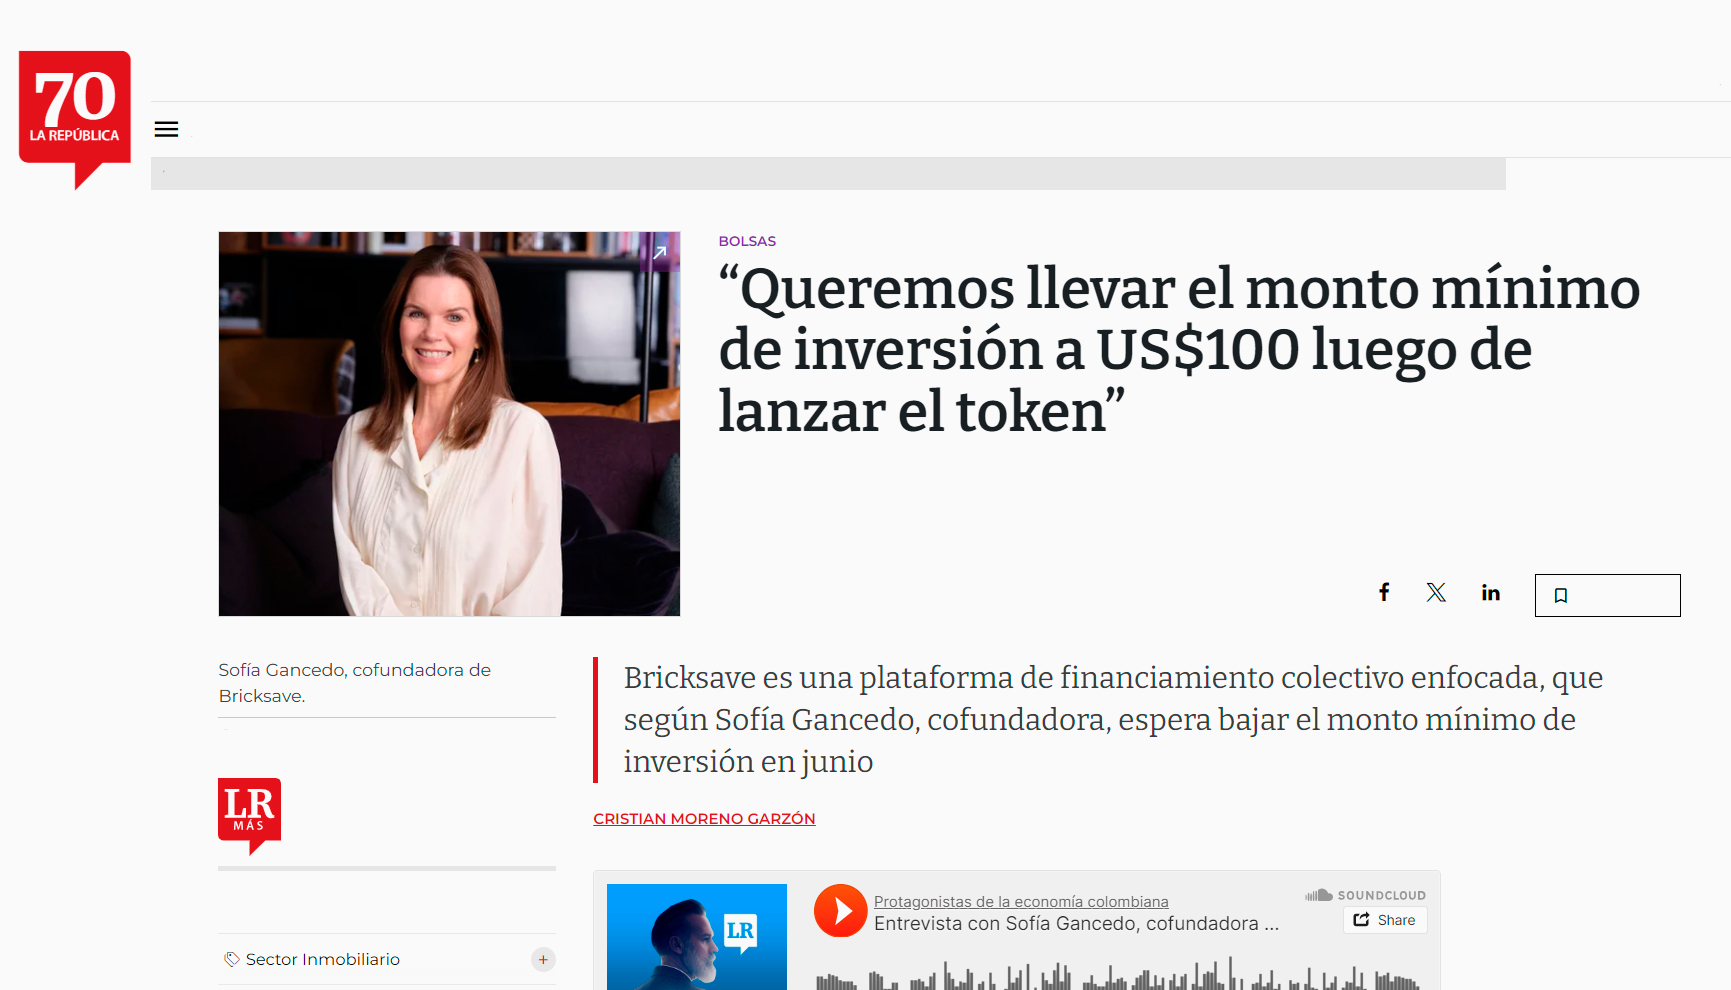 Bricksave in the press (La República, Colombia): ‘We want to bring the minimum investment amount to US$100 after launching the token’.